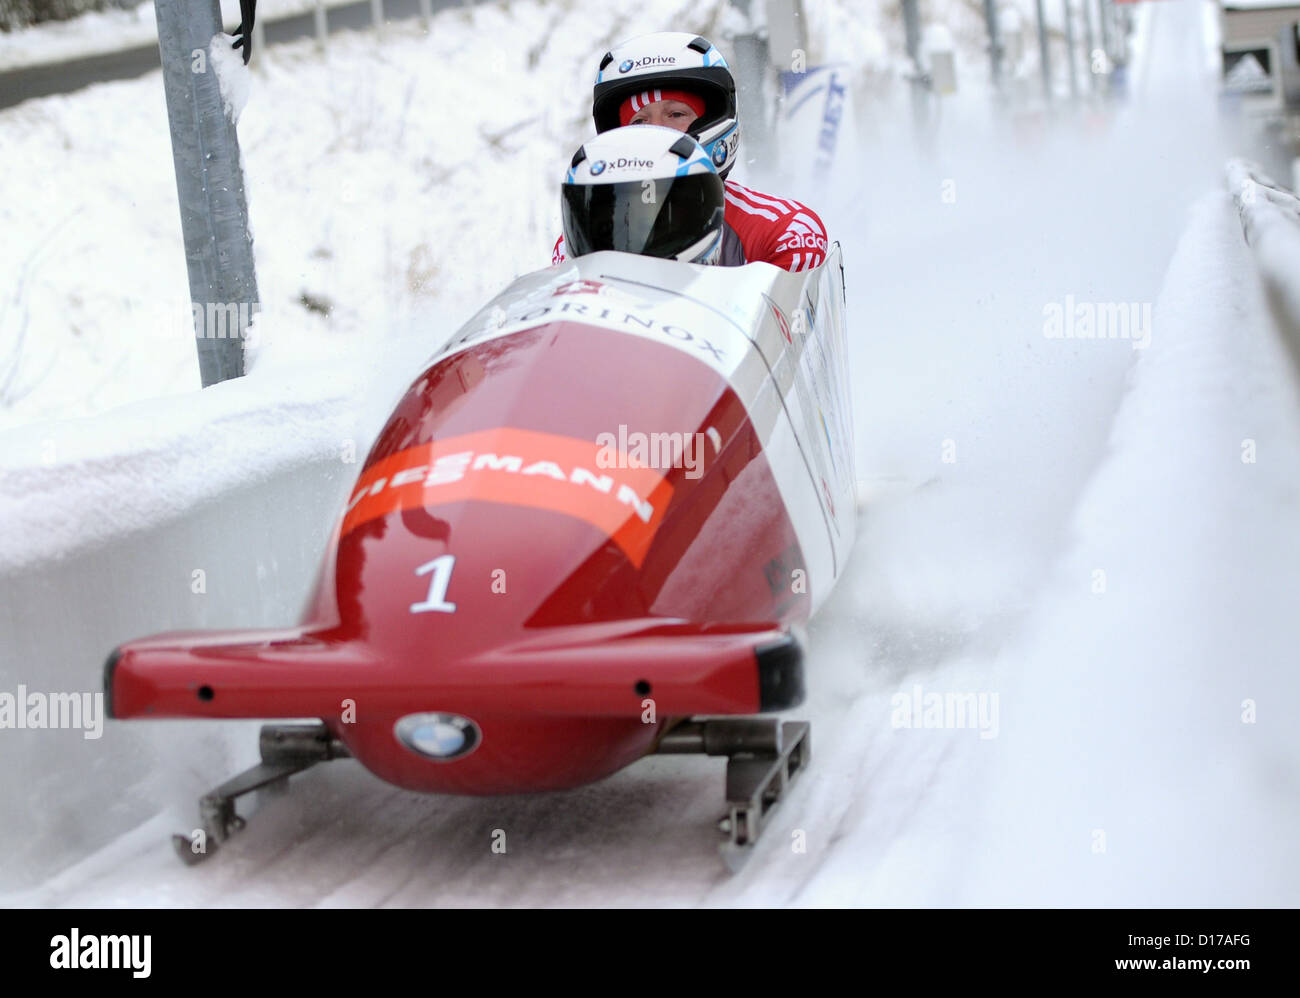 Swiss bobsleigh Beat Hefti (R) and Thomas Lamparter race in the 2012 FIBT tow-person bobsleigh world cup in Winterberg, Germany, 08 December 2012. They came in first place Photo: DANIEL NAUPOLD Stock Photo